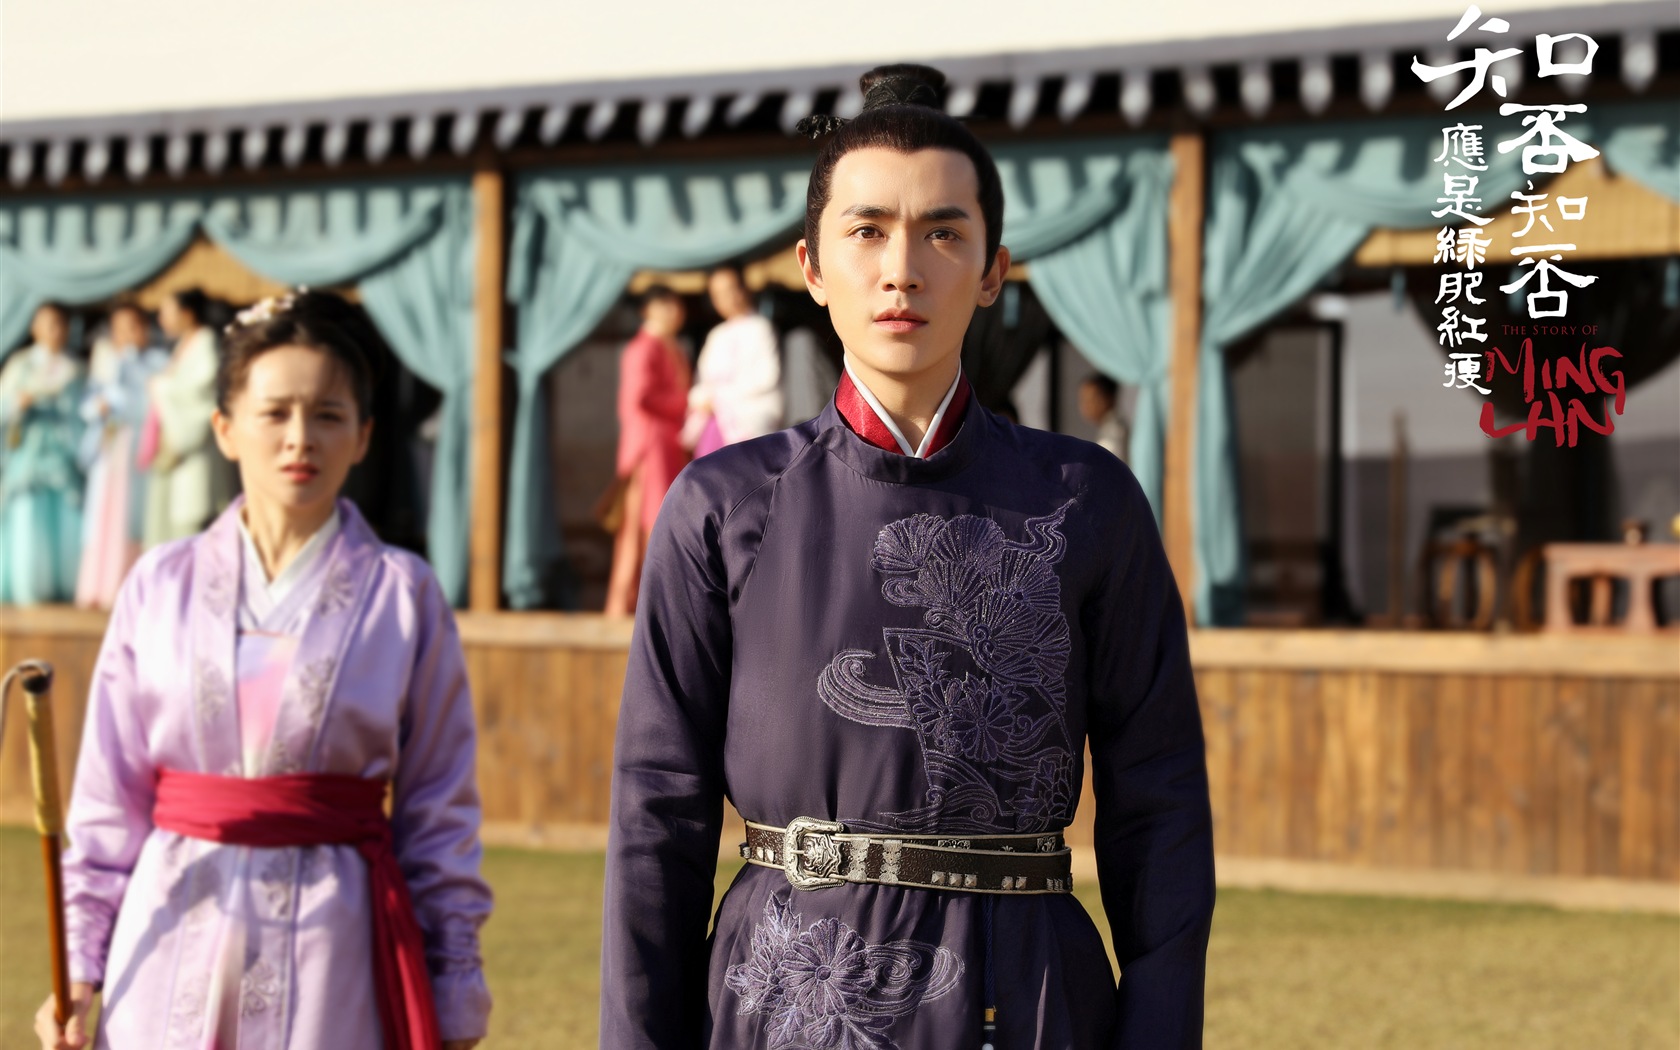 The Story Of MingLan, TV series HD wallpapers #38 - 1680x1050